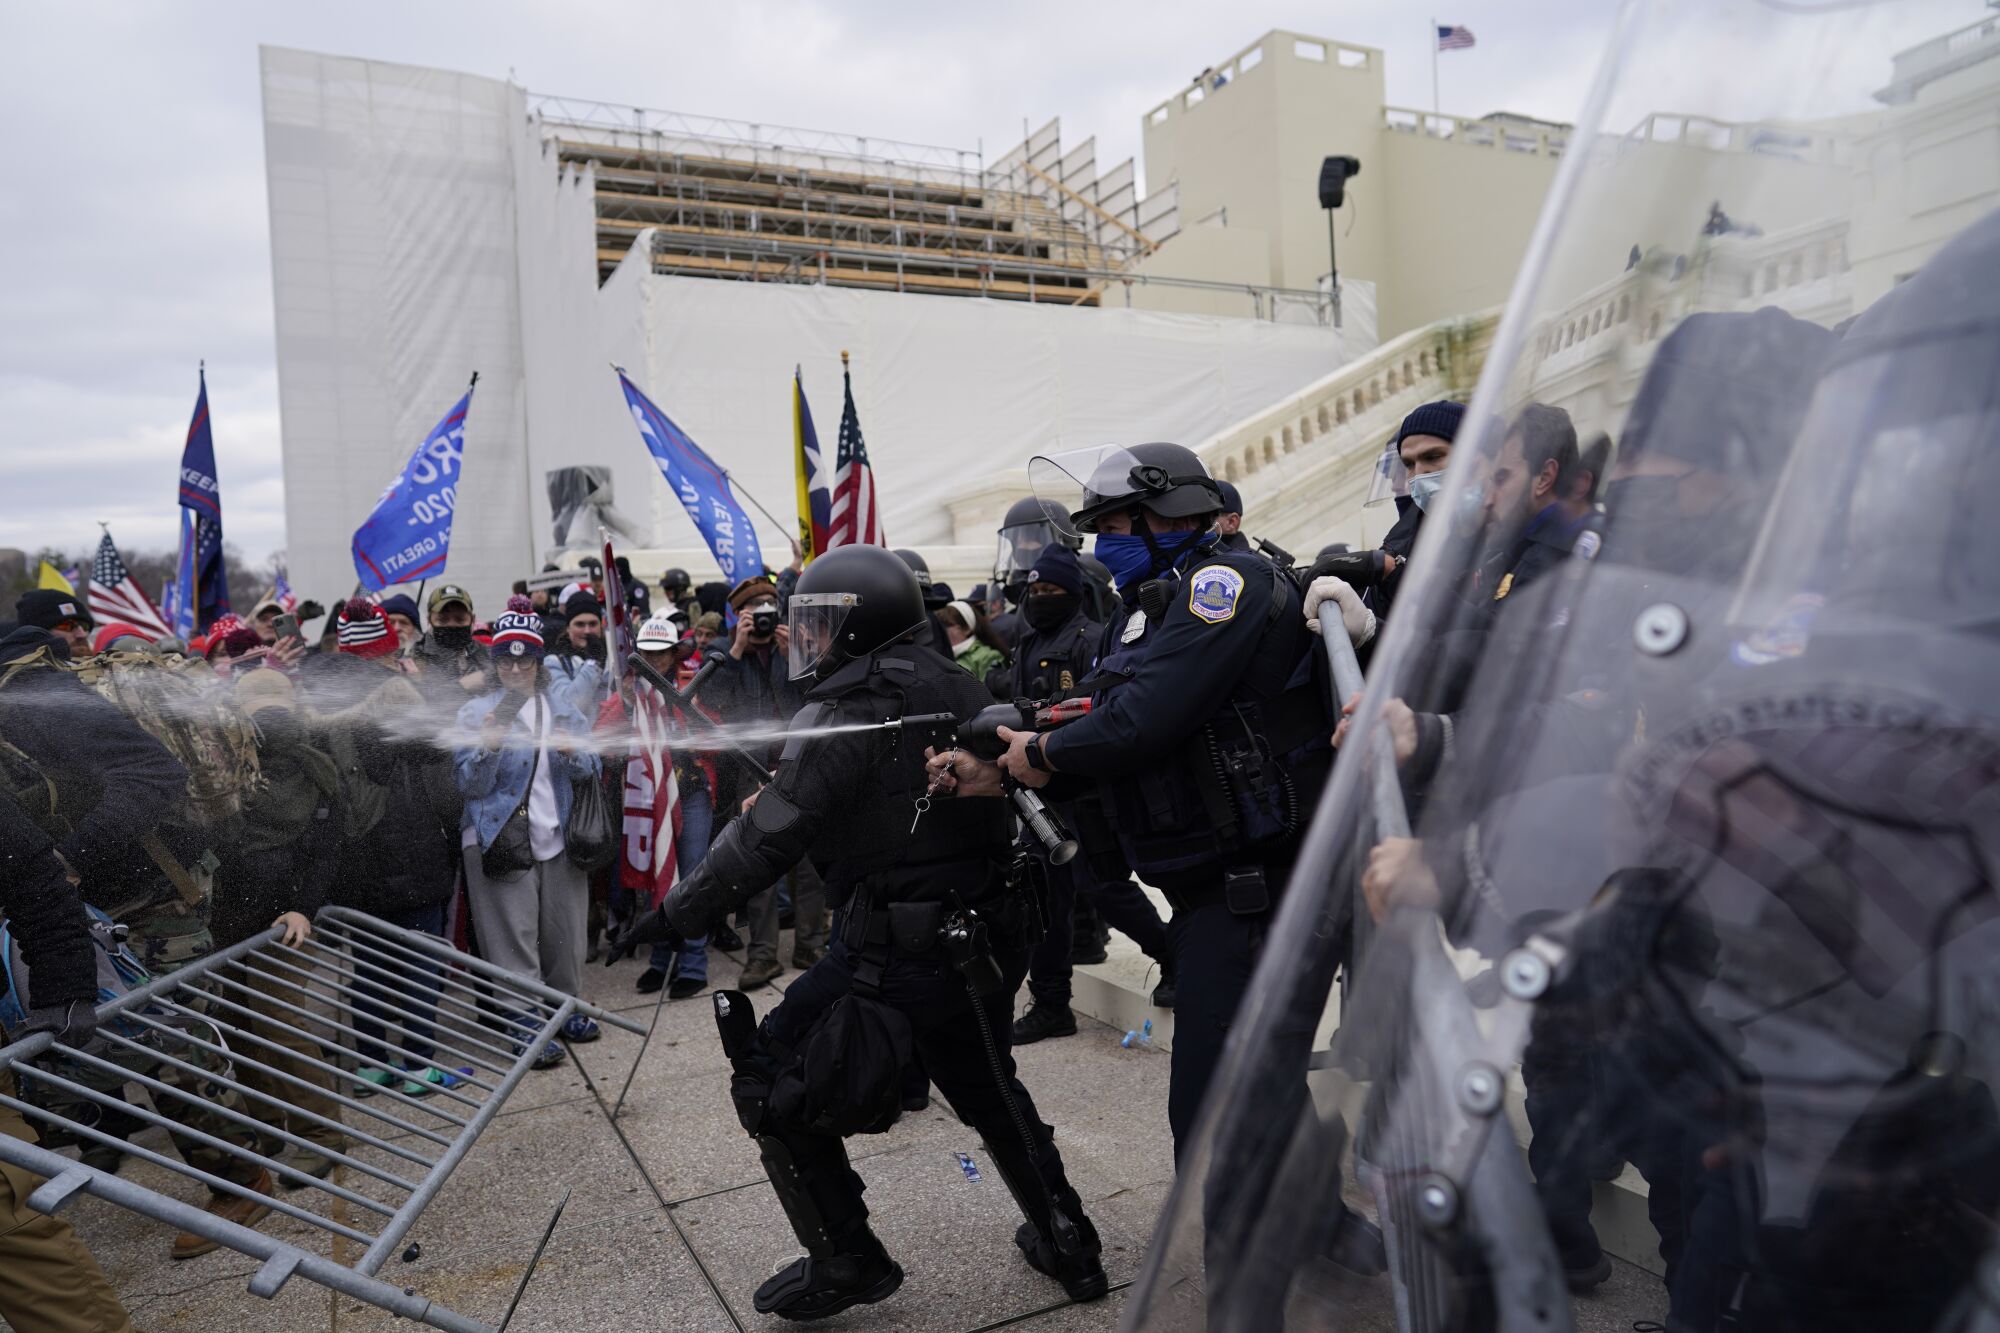 An officer shoots a stream of pepper spray at Trump supporters forcing their way through a barricade.